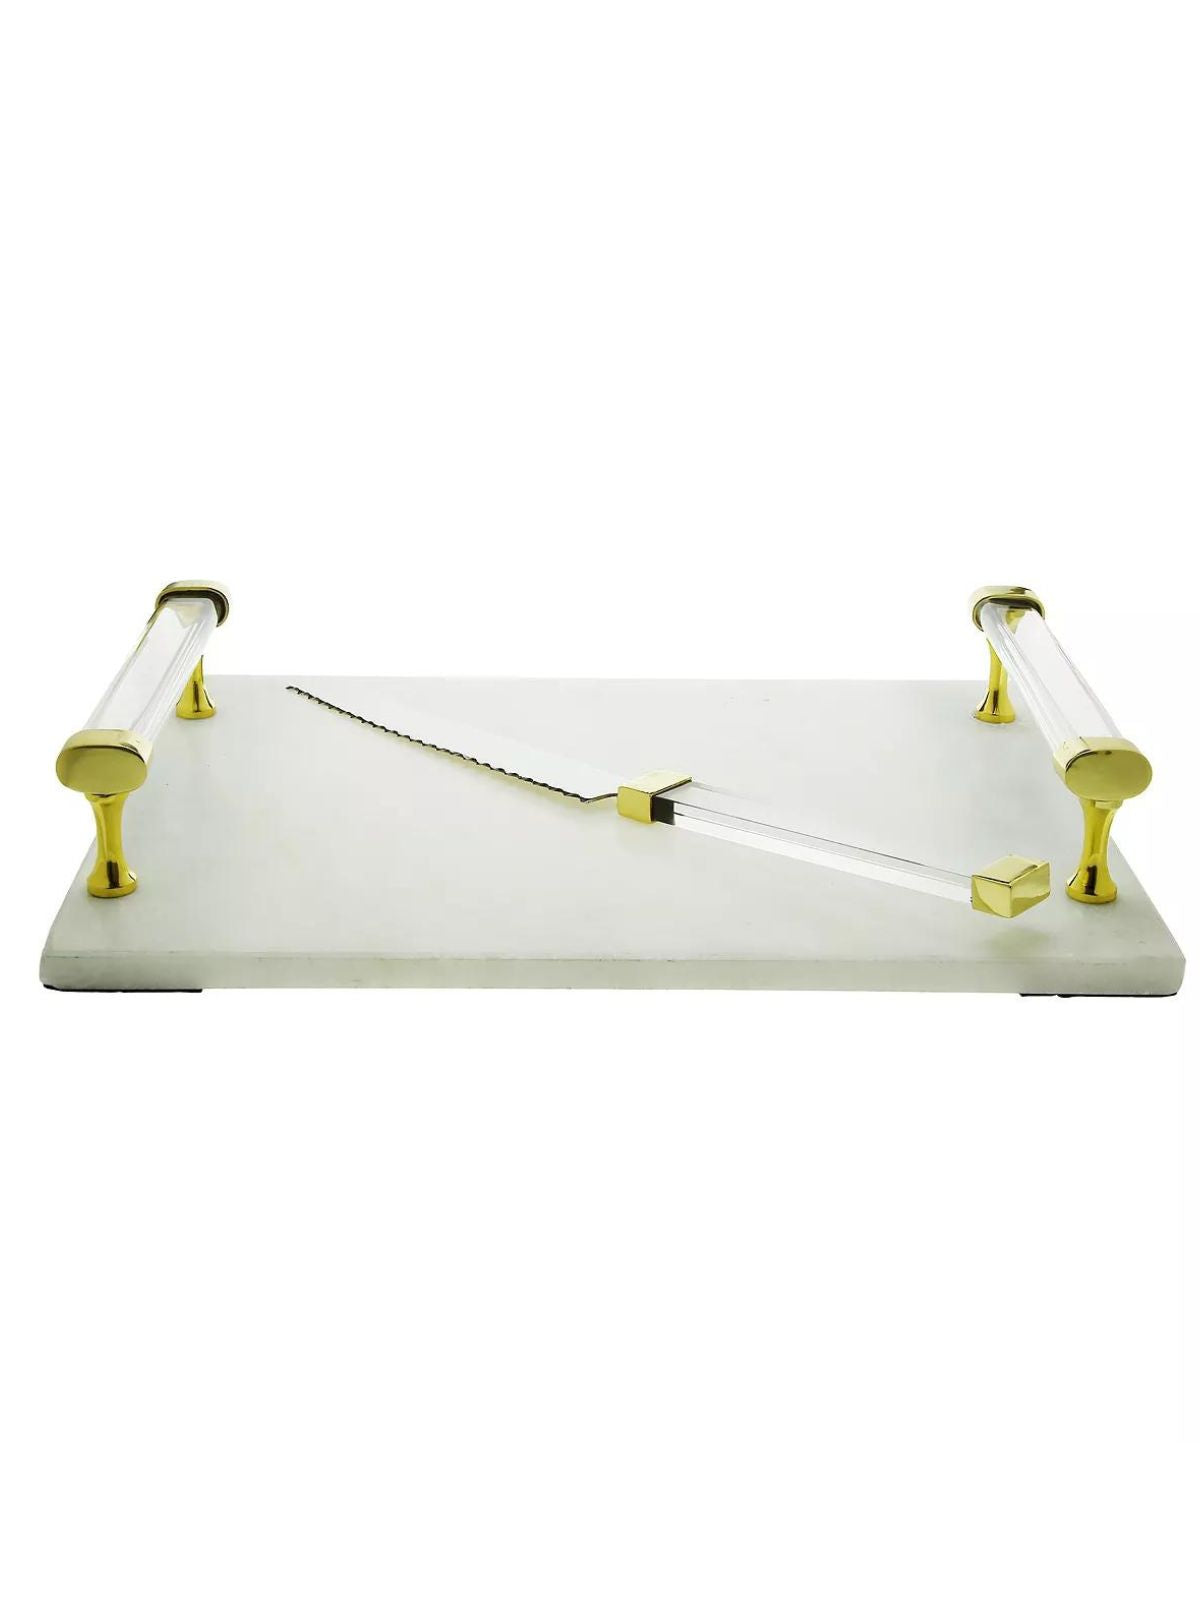 Luxury White Marble Serving Tray with Acrylic Handles and Knife Set, 16L x 11W. 